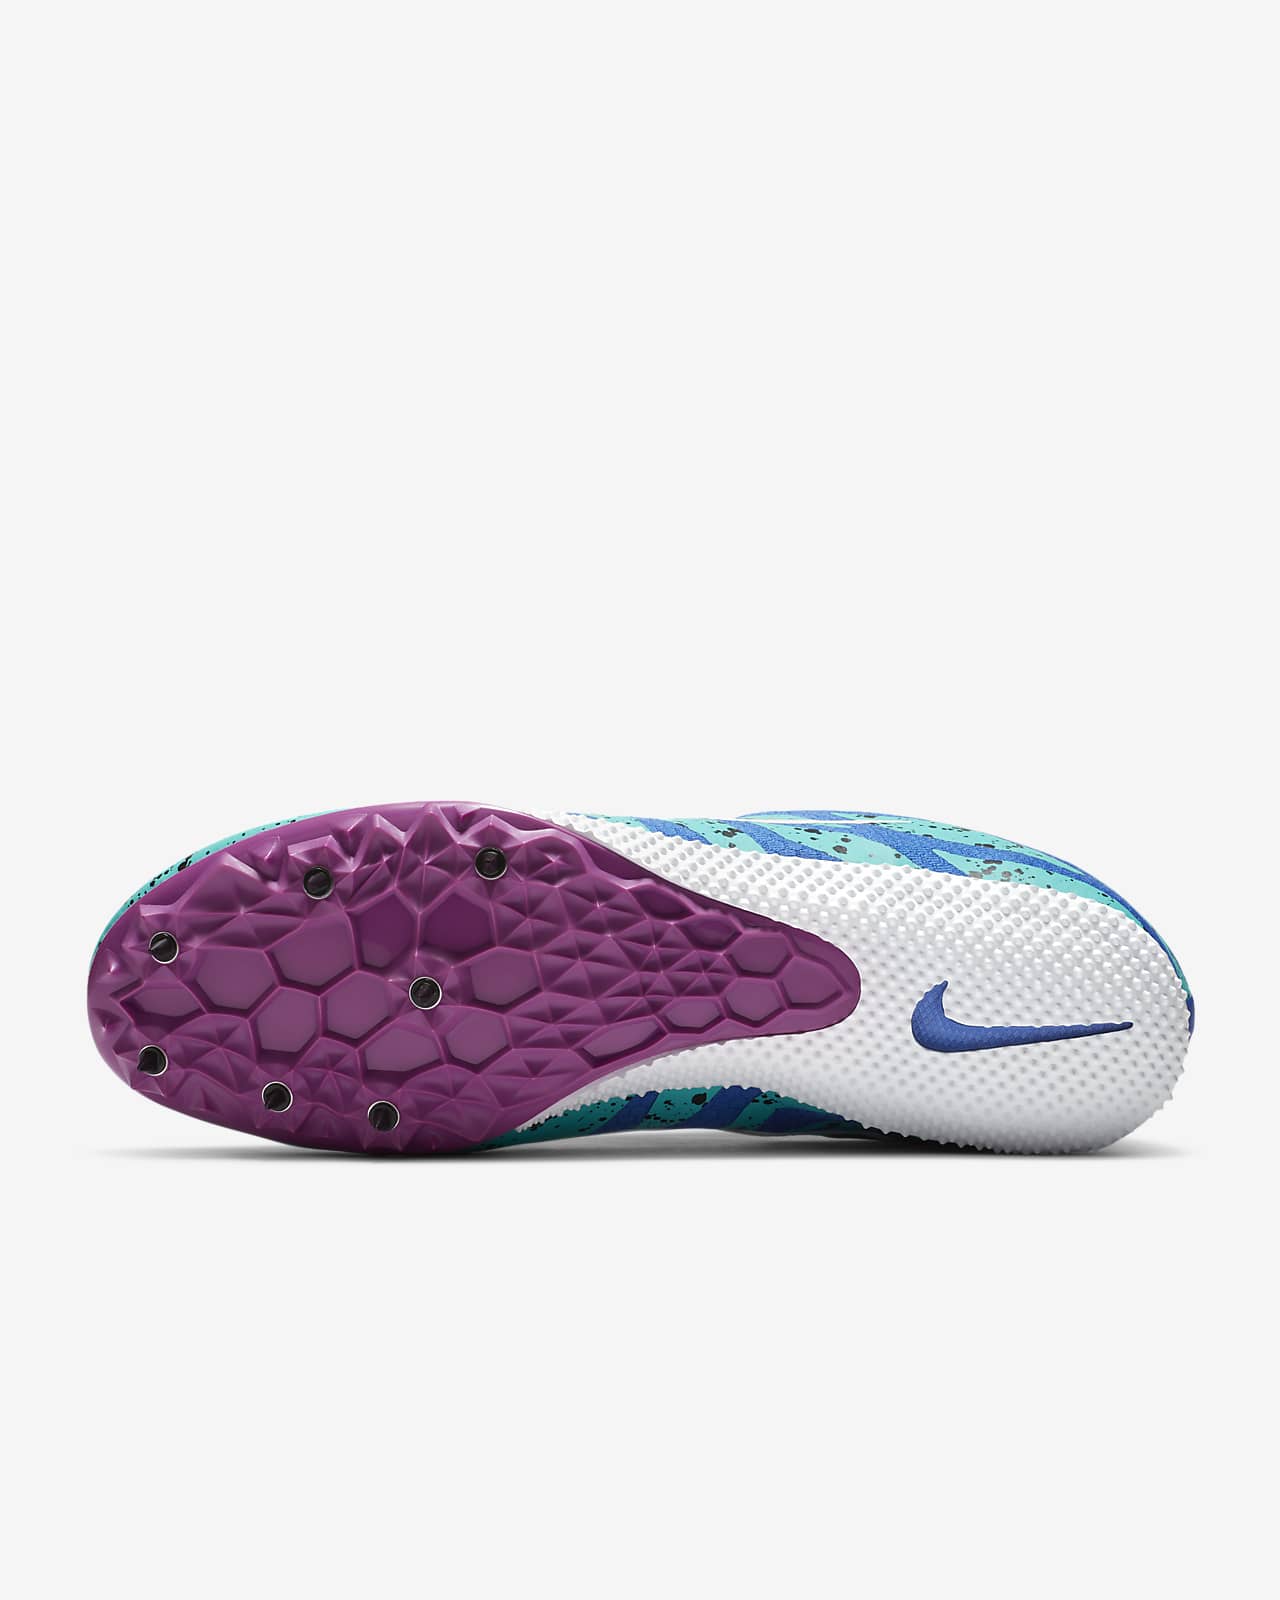 nike zoom rival s 9 weight